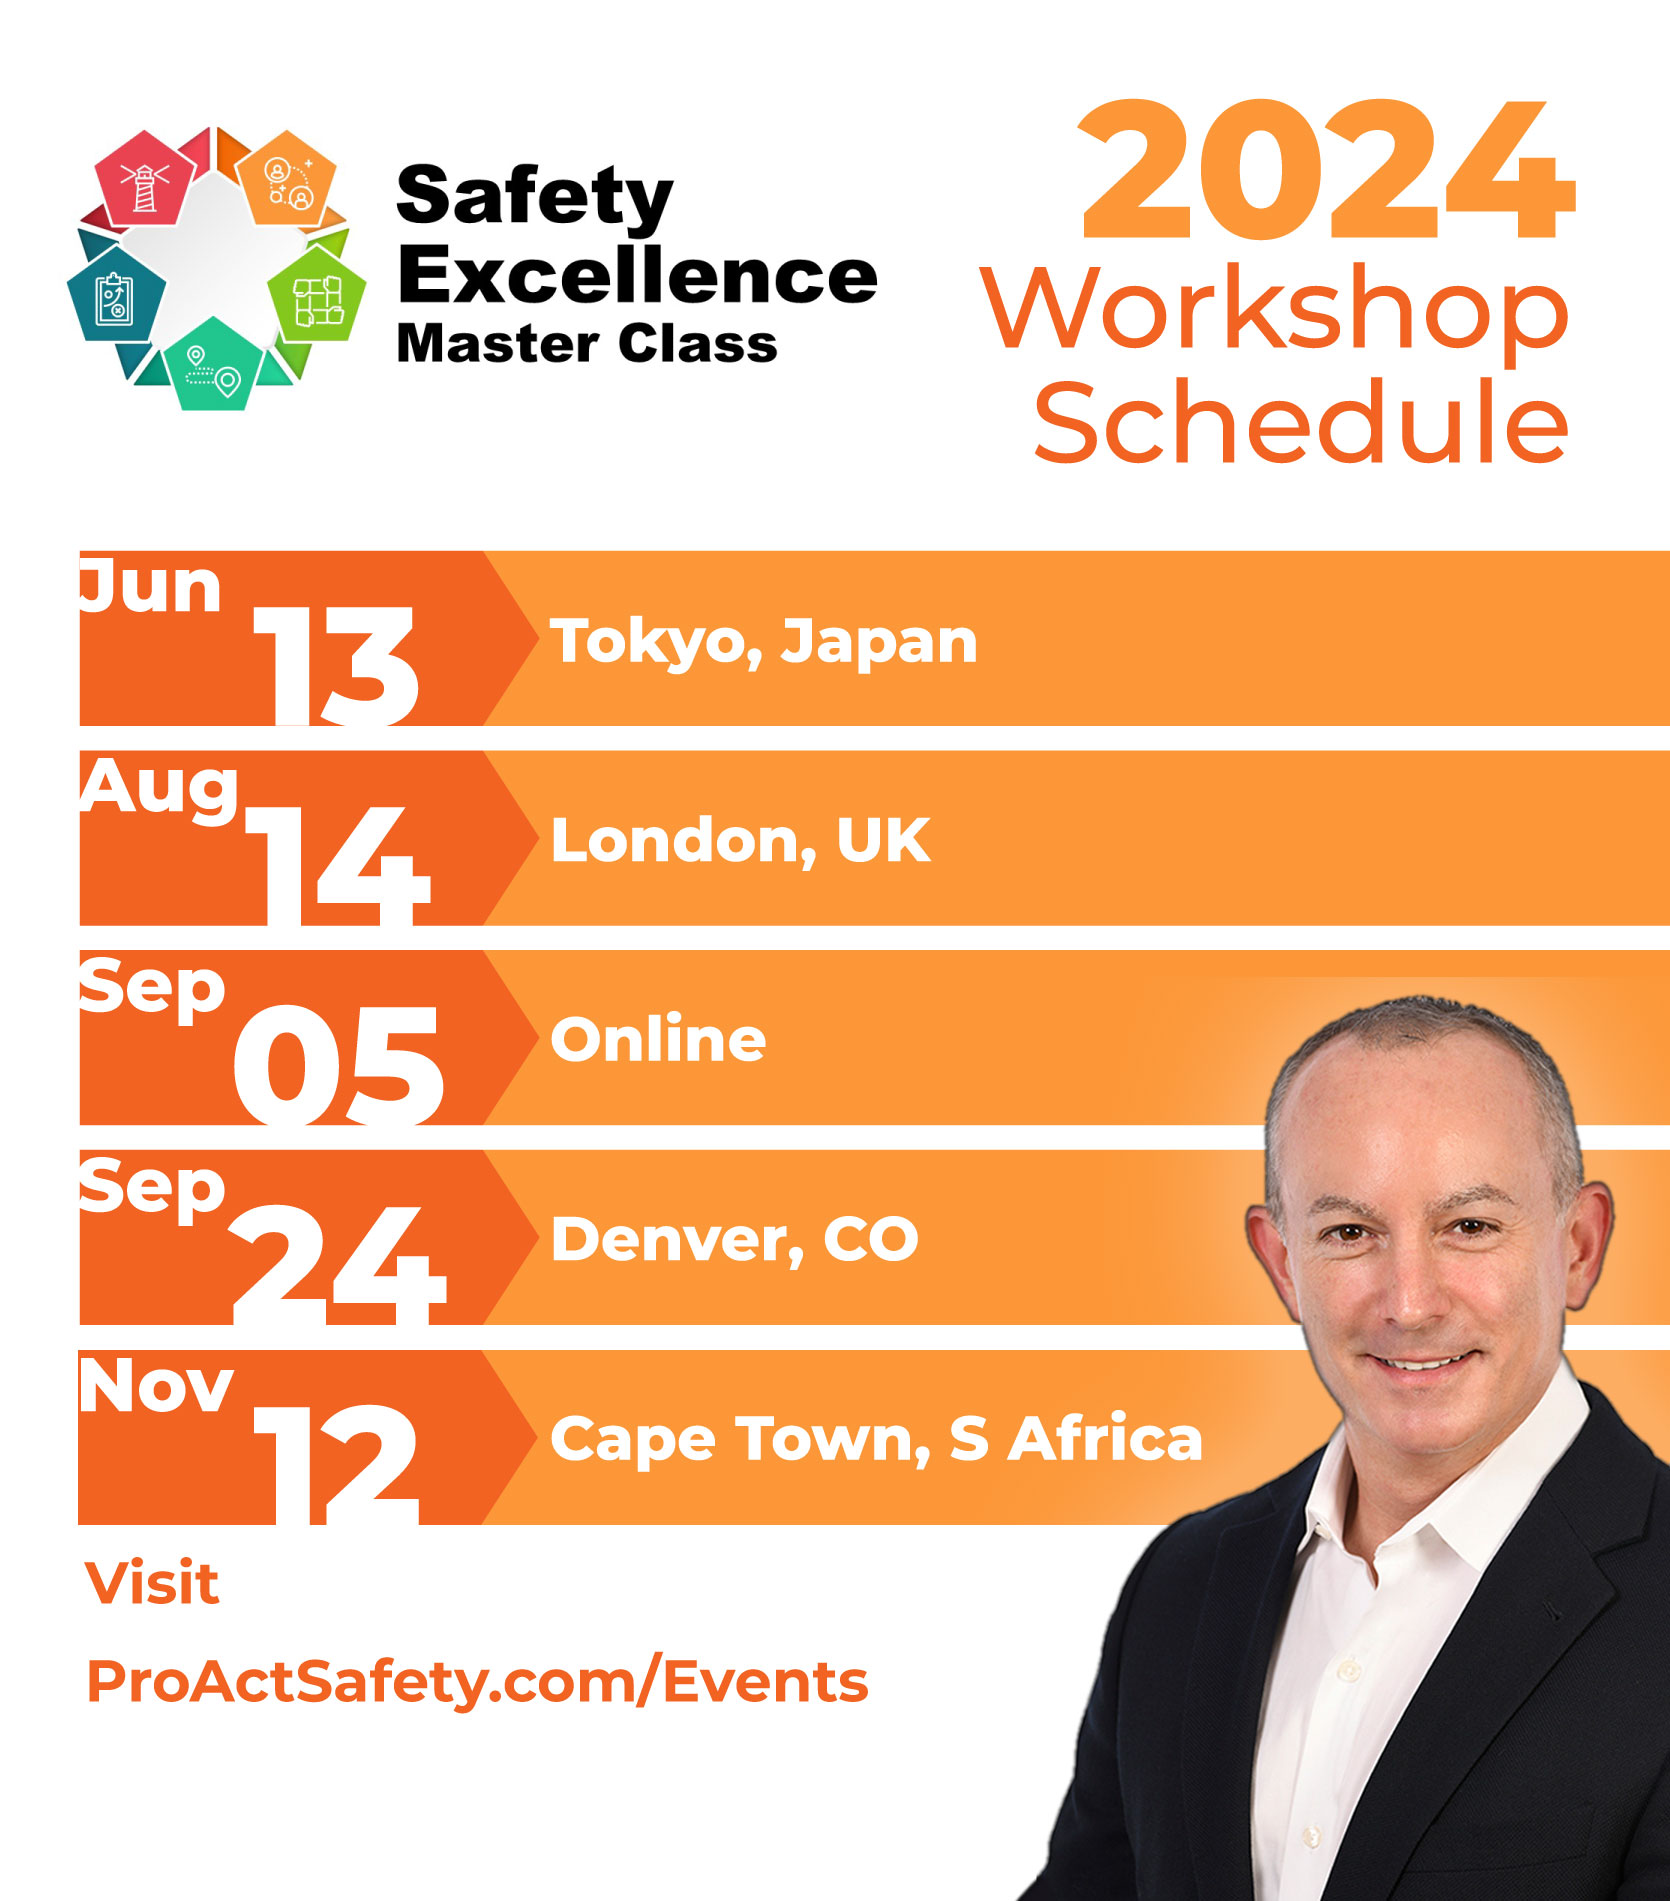 Safety Excellence Masterclass Schedule